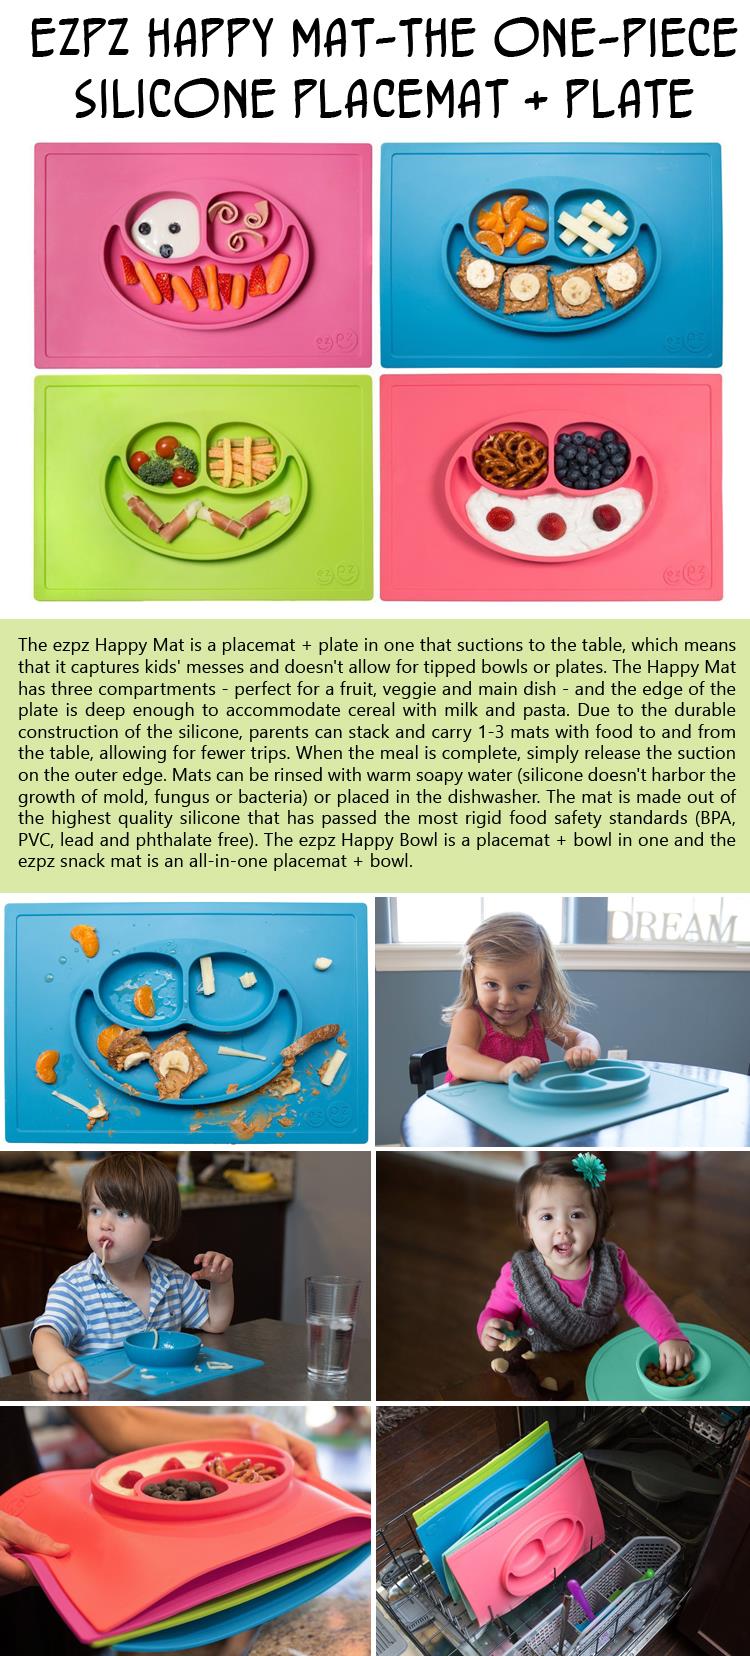 ezpz Happy Mat-The One-piece silicone placemat and plate